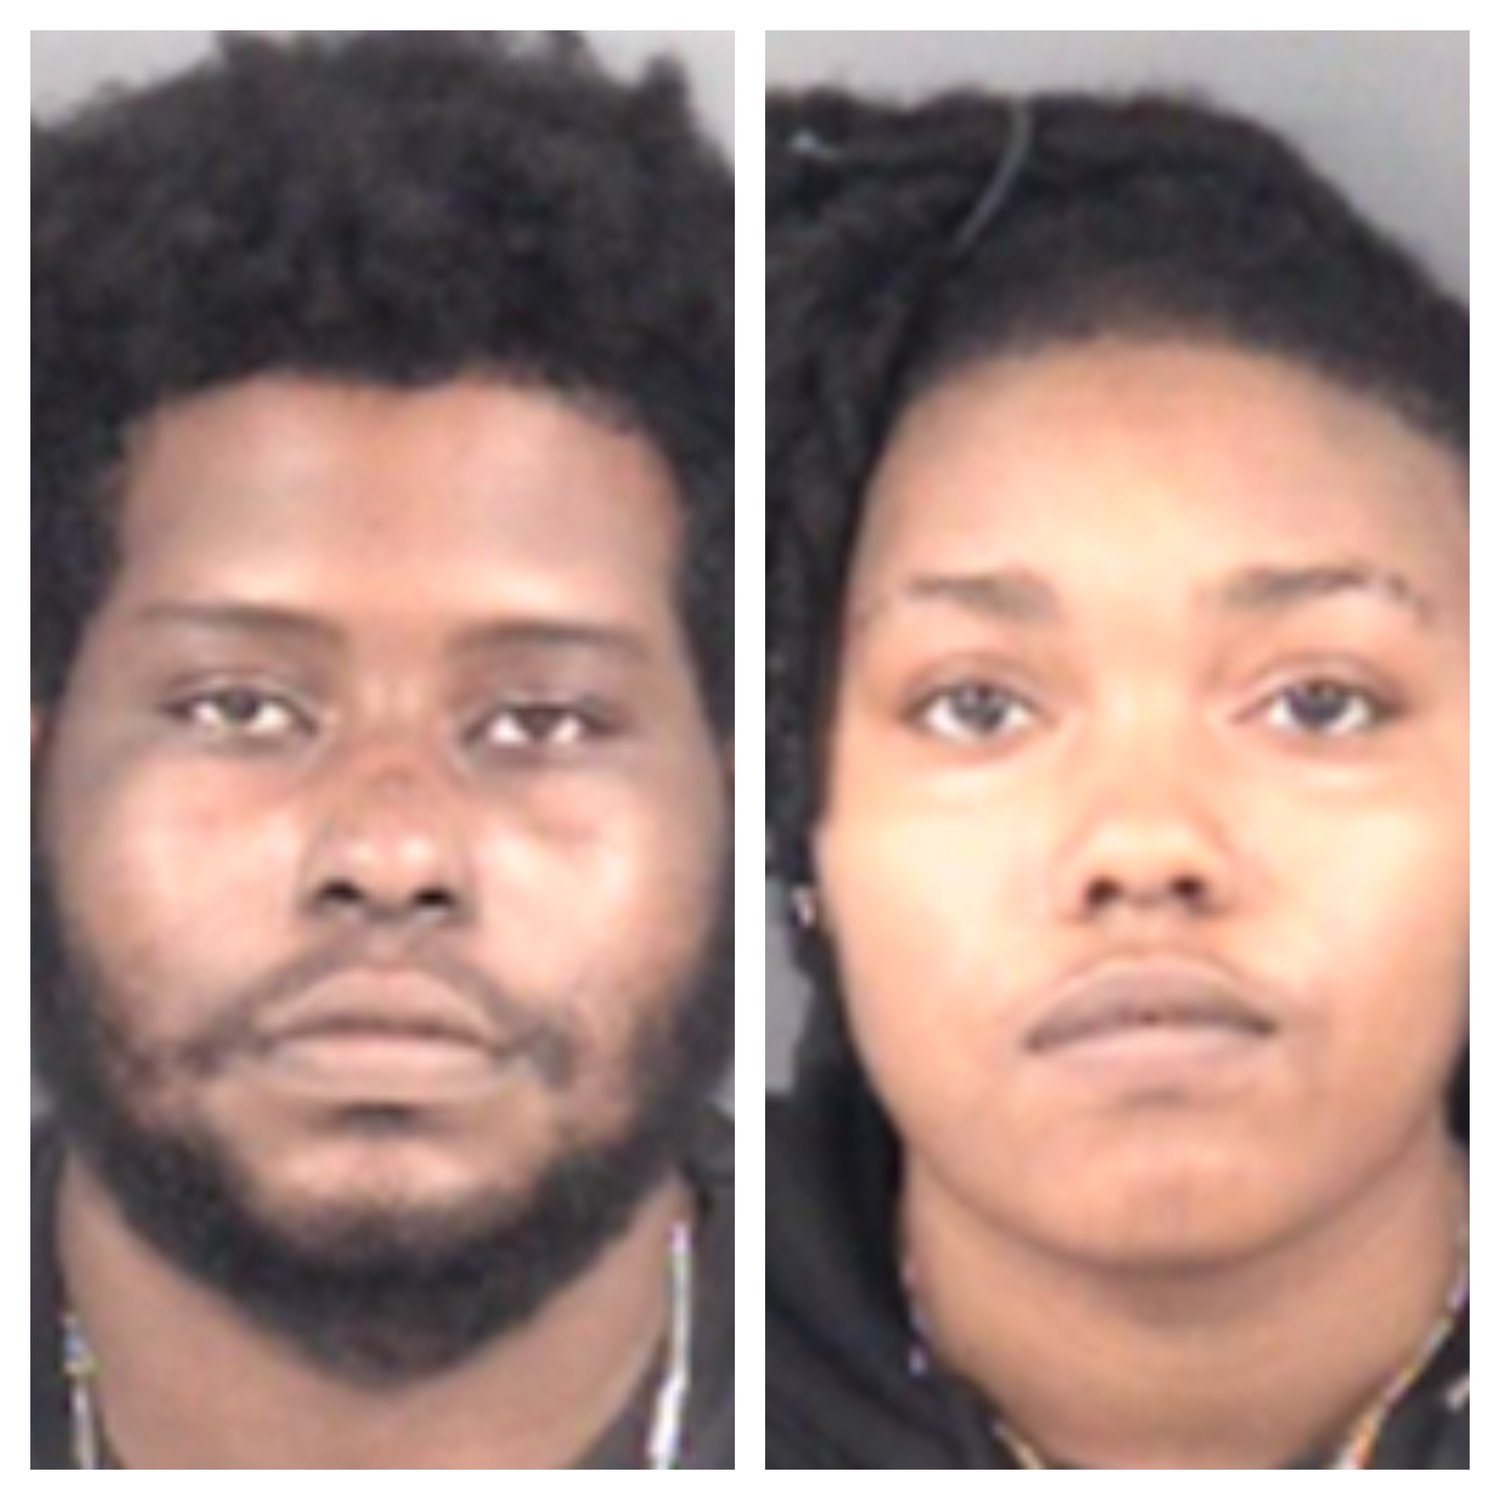 Jamel Brunson and Damaryia Mack are charged with murder in the July 23, 2021, death of Kotasha Griffith.